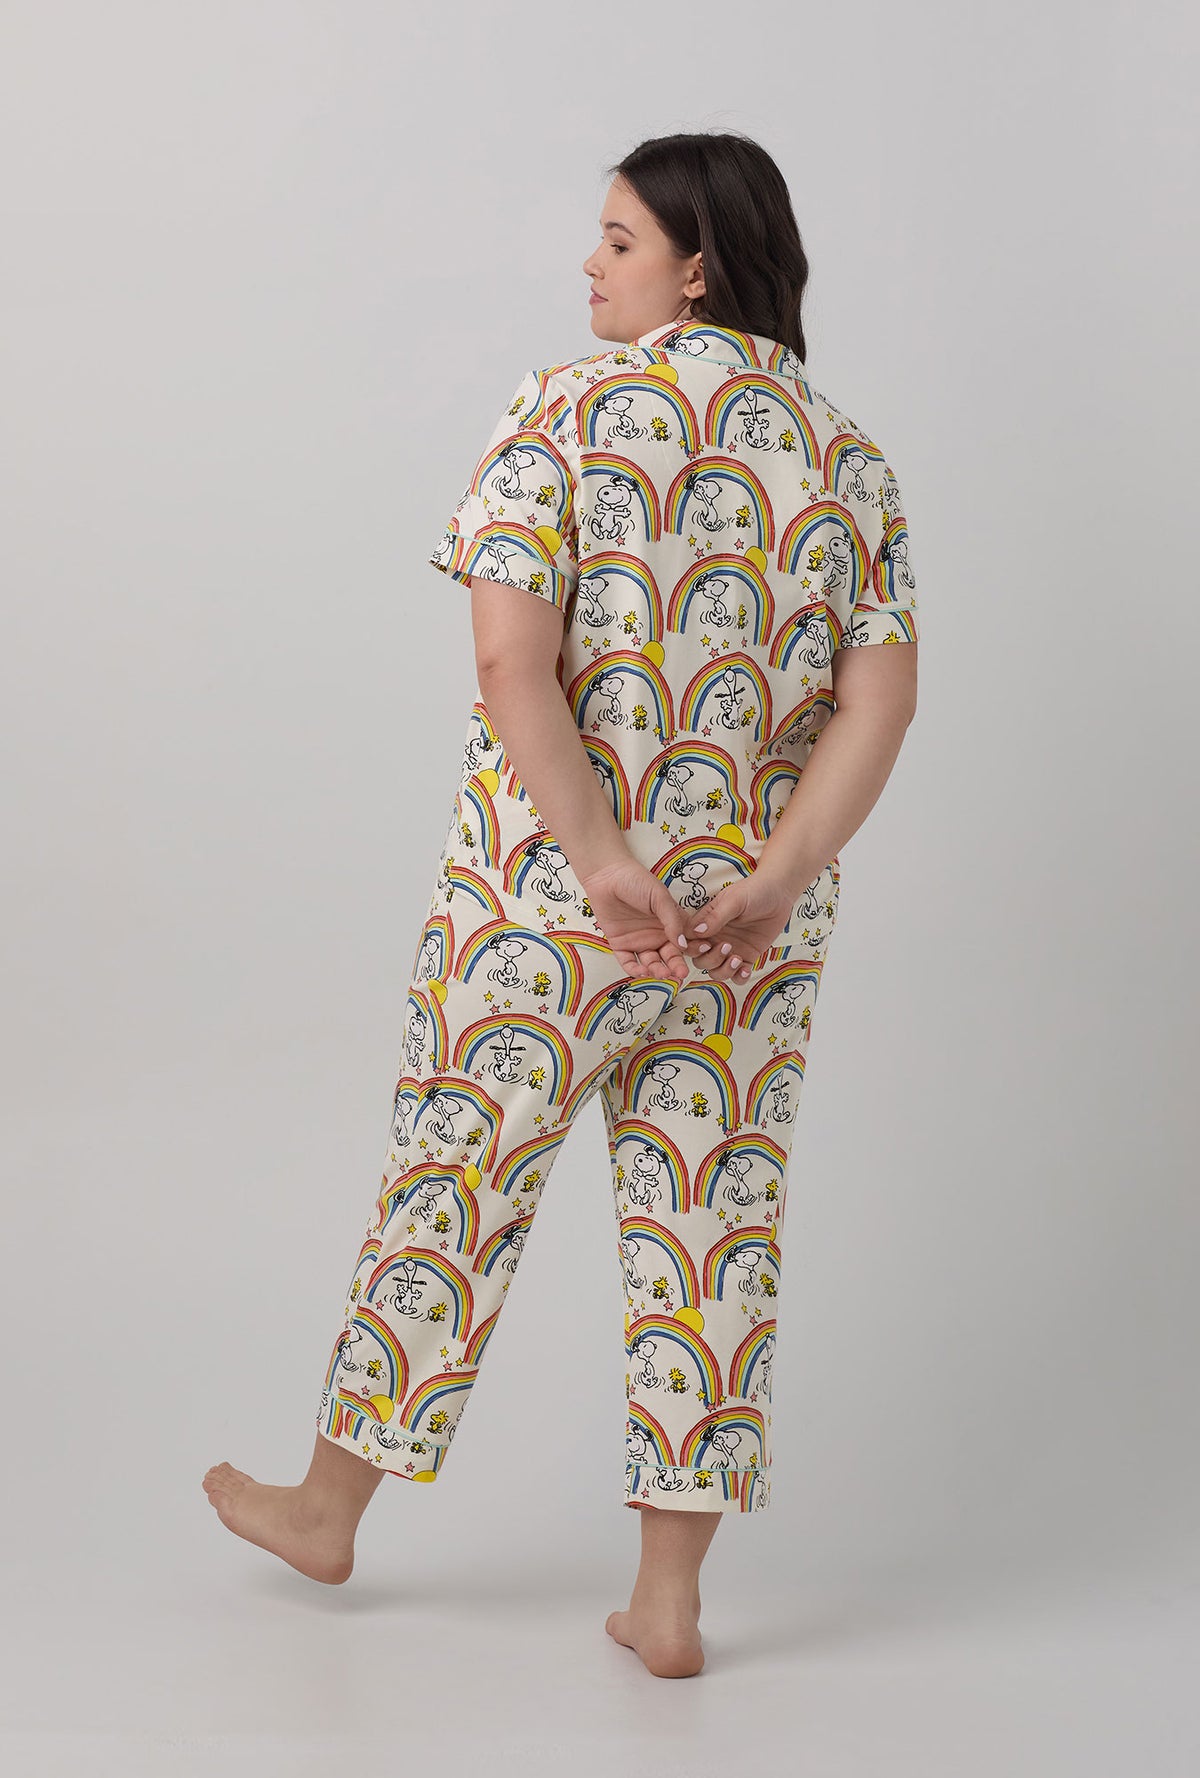 A lady wearing plus size white Short Sleeve Classic Stretch Jersey Cropped PJ Set with Sunshine Snoopy print.